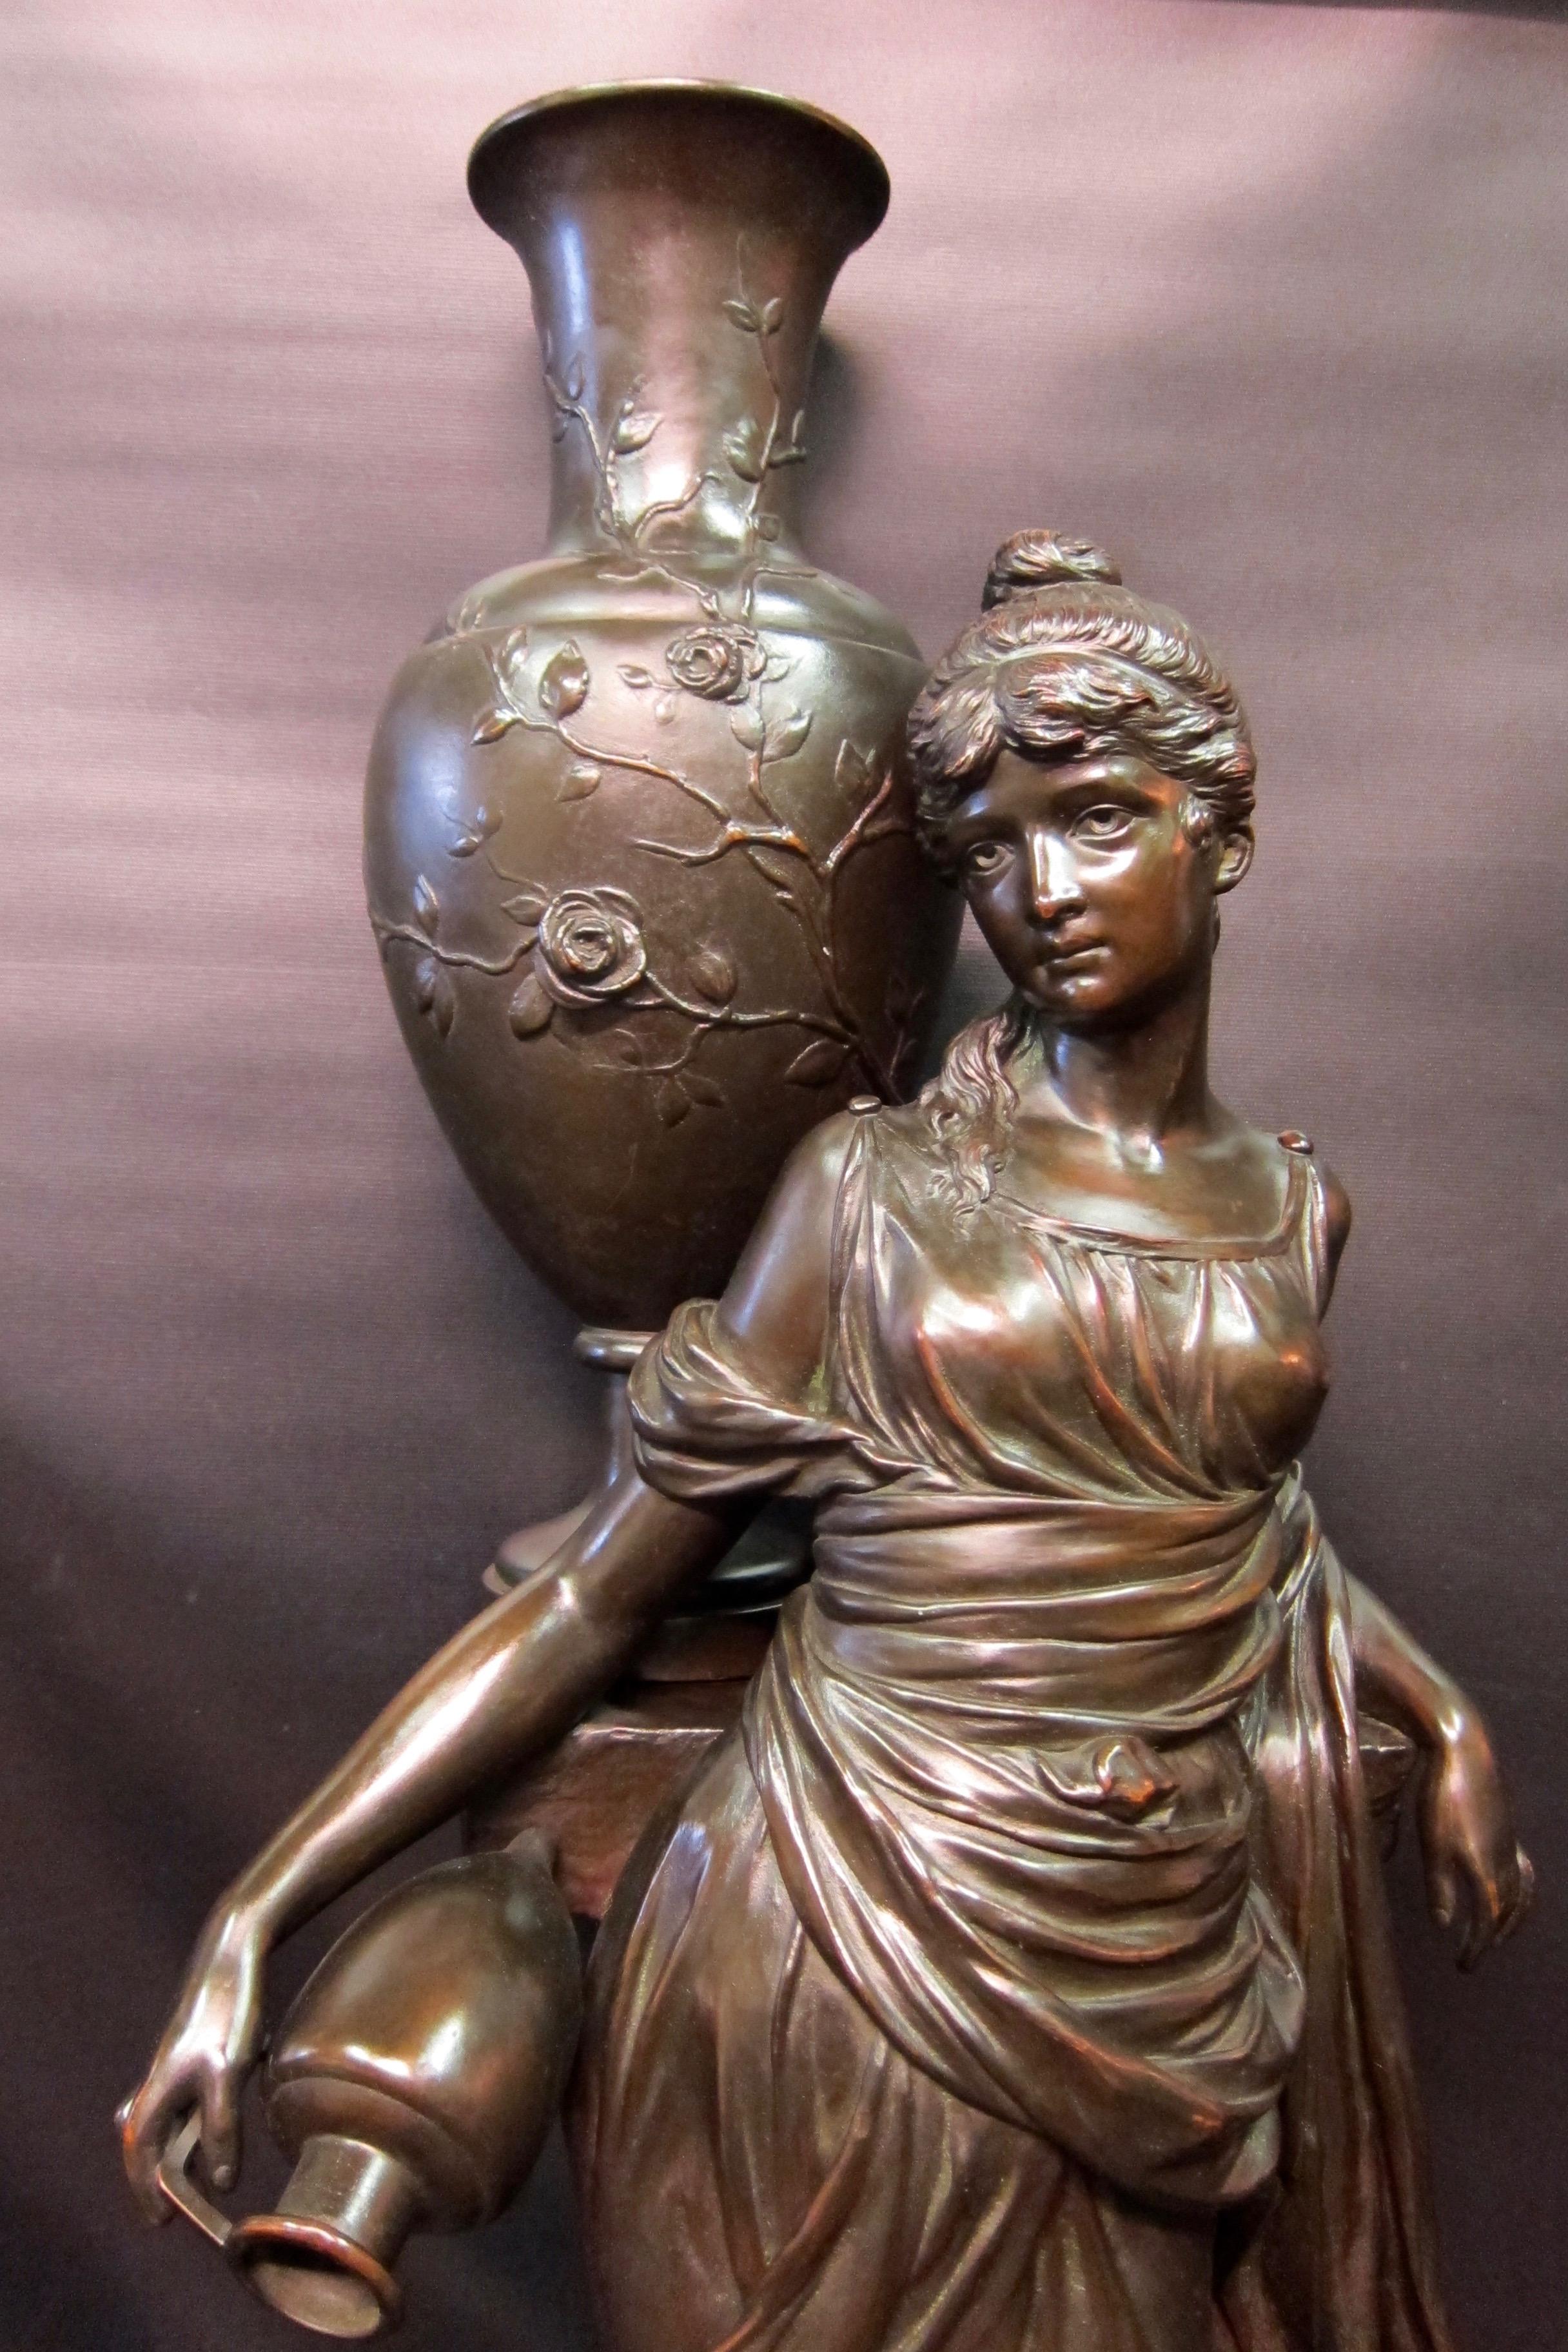 This oversize and rare 19th century patinated copper clad sculpture is designed with a beautifully rendered Grecian girl. This girl, costumed in a flowing garment, is positioned in front of a stone bearing a large decorated urn atop. The vintage